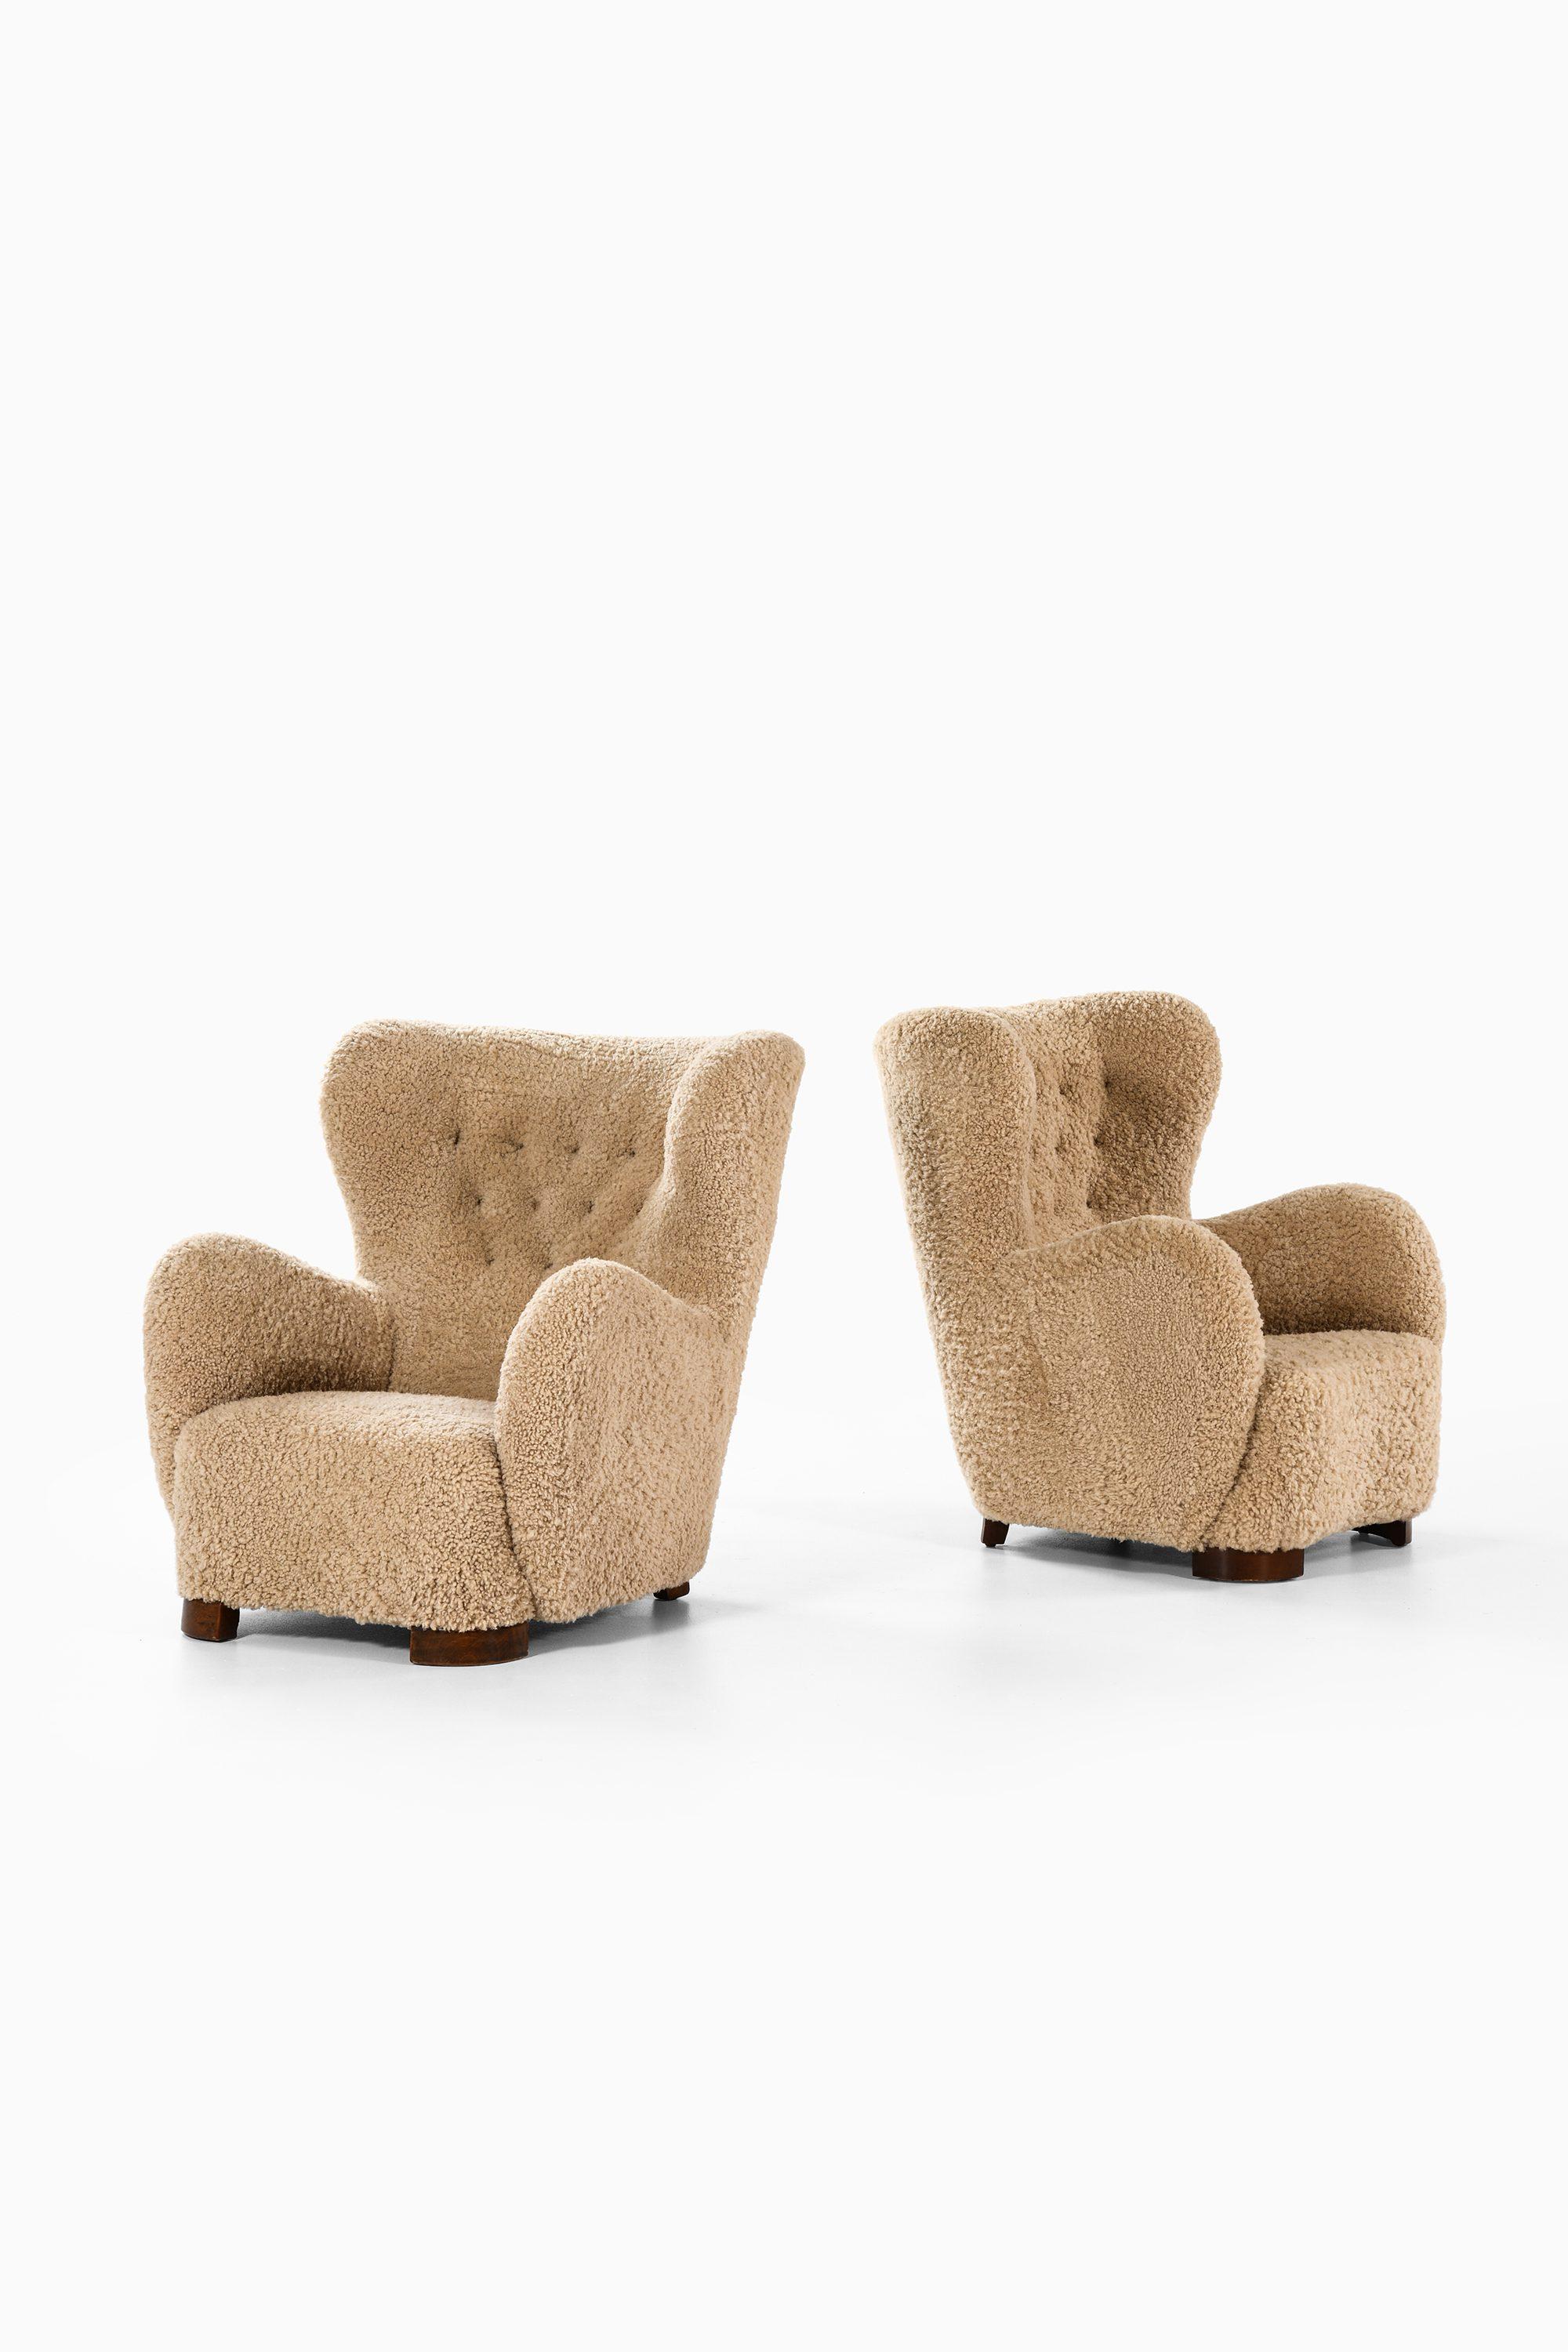 Pair of Easy Chairs in Stained Beech and Lambskin, 1940s

Additonal Information:
Material: Stained beech and lambskin
Style: midcentury, Scandinavian
Produced in Denmark
Dimensions (W x D x H): 87 x 100 x 94 cm
Seat Height: 36 cm
Condition: